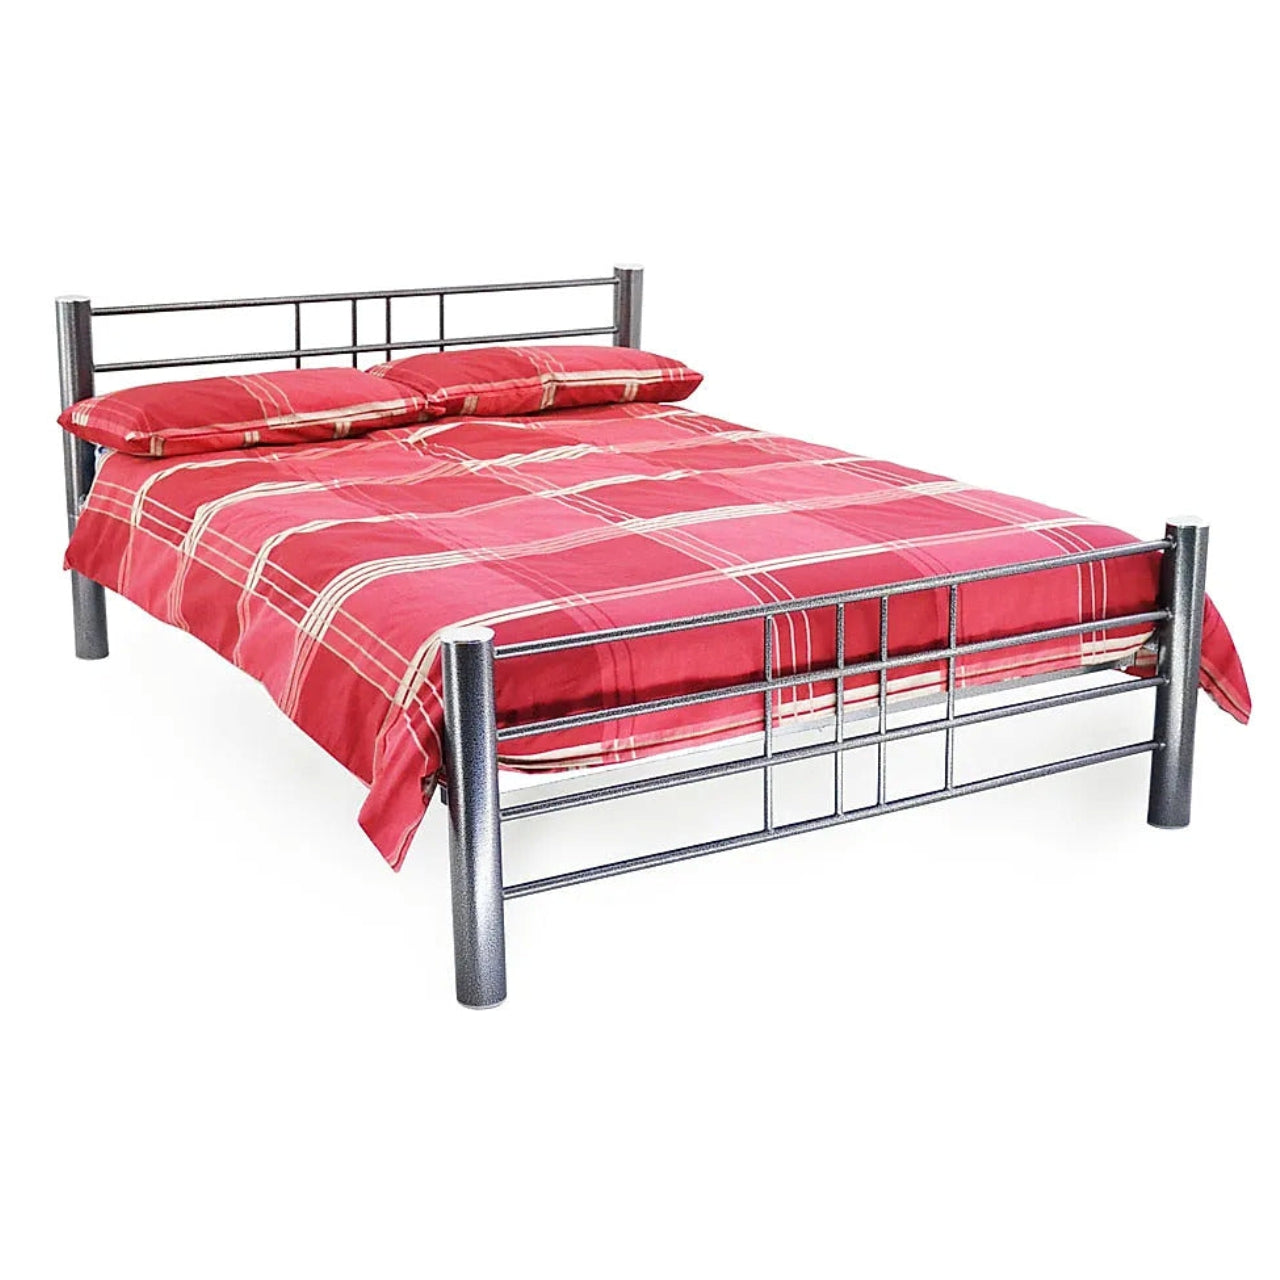 Metal Bed: Silver Metal Double Bed